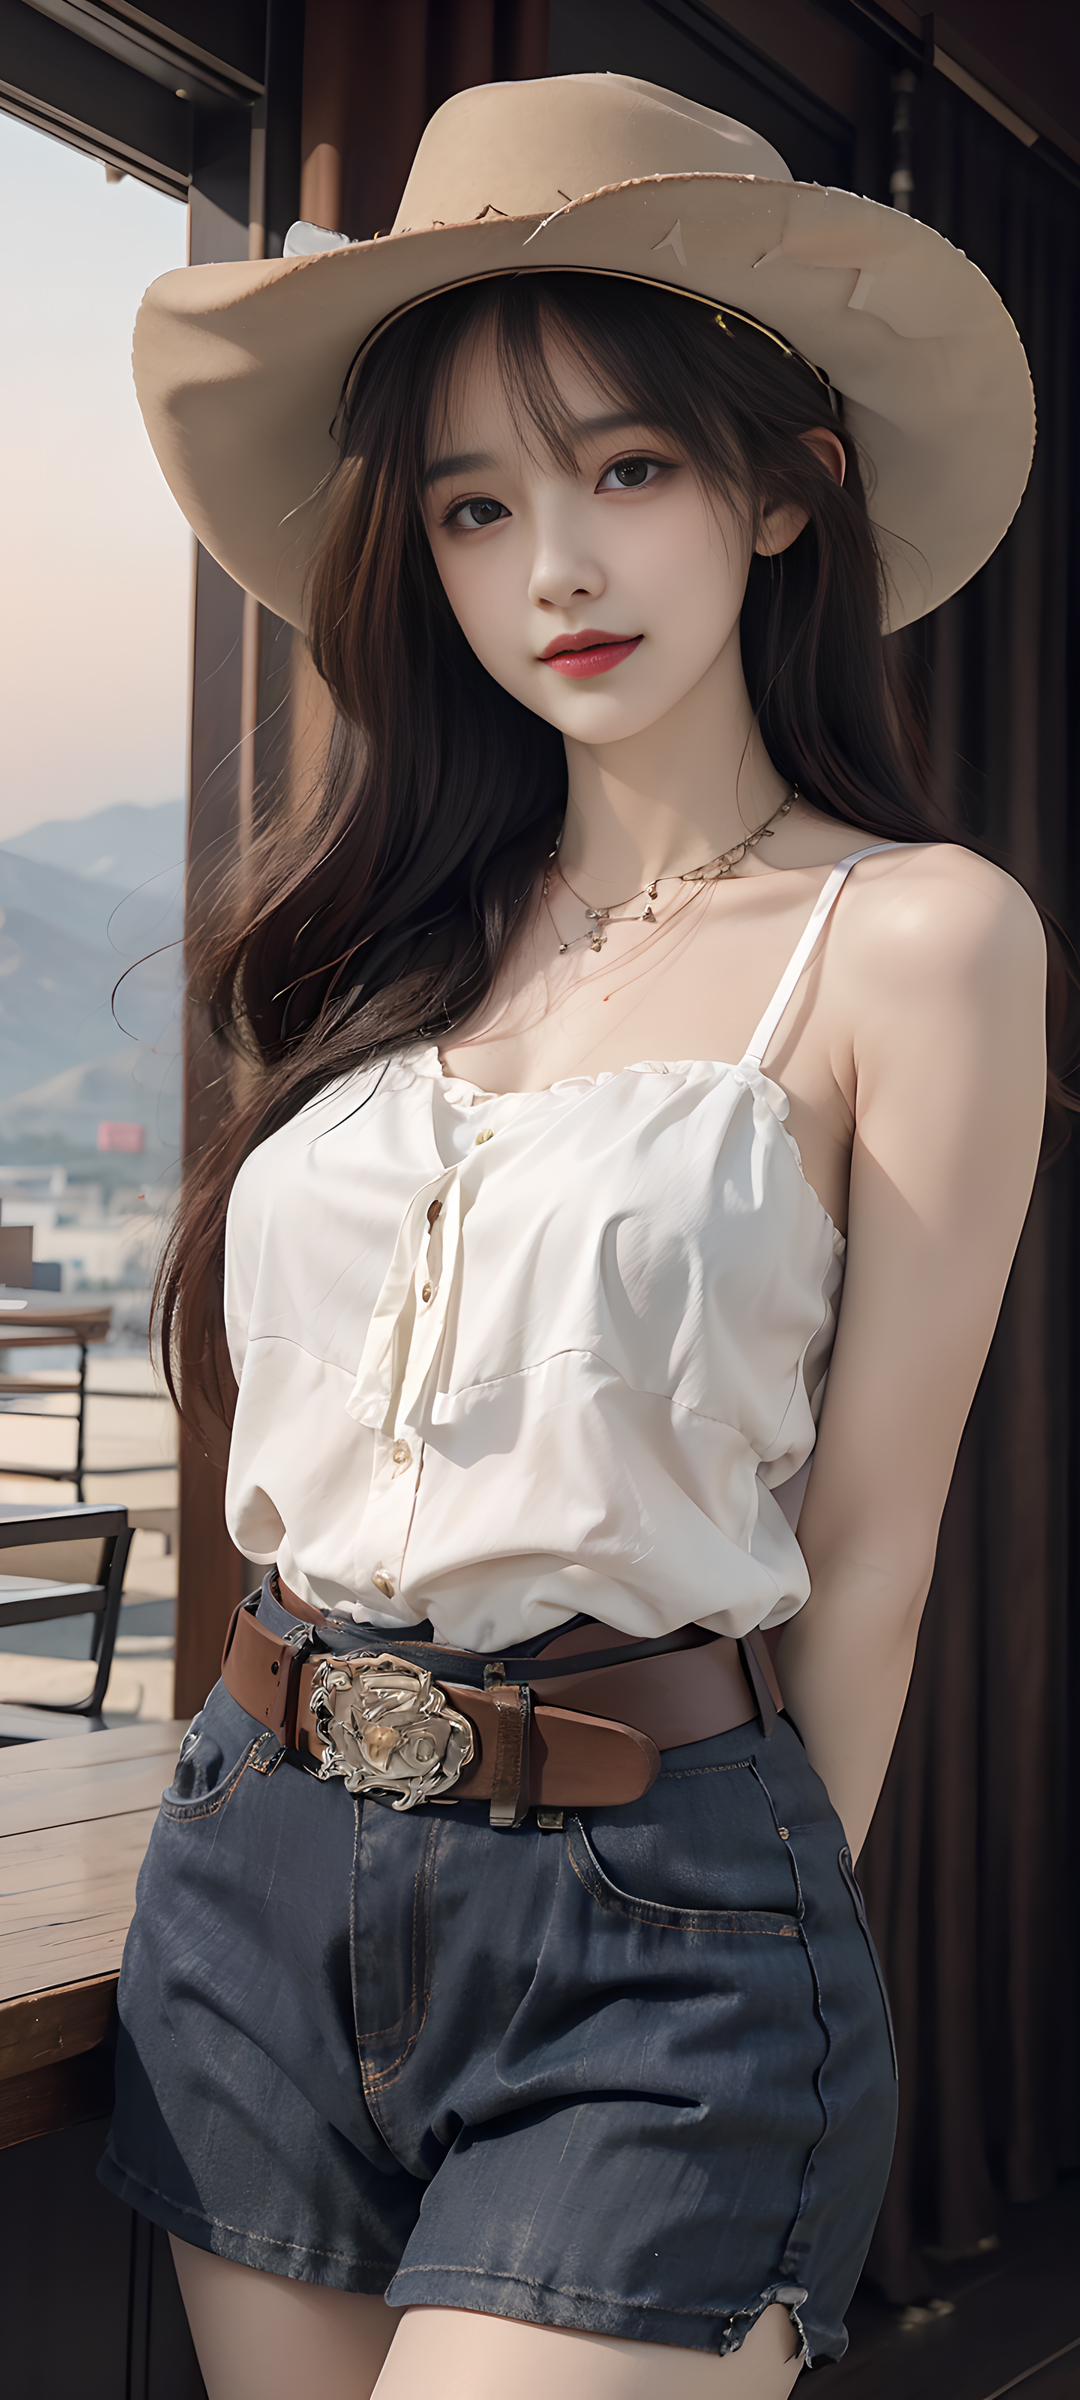 General 1080x2400 long hair AI art Asian women straw hat portrait display looking at viewer